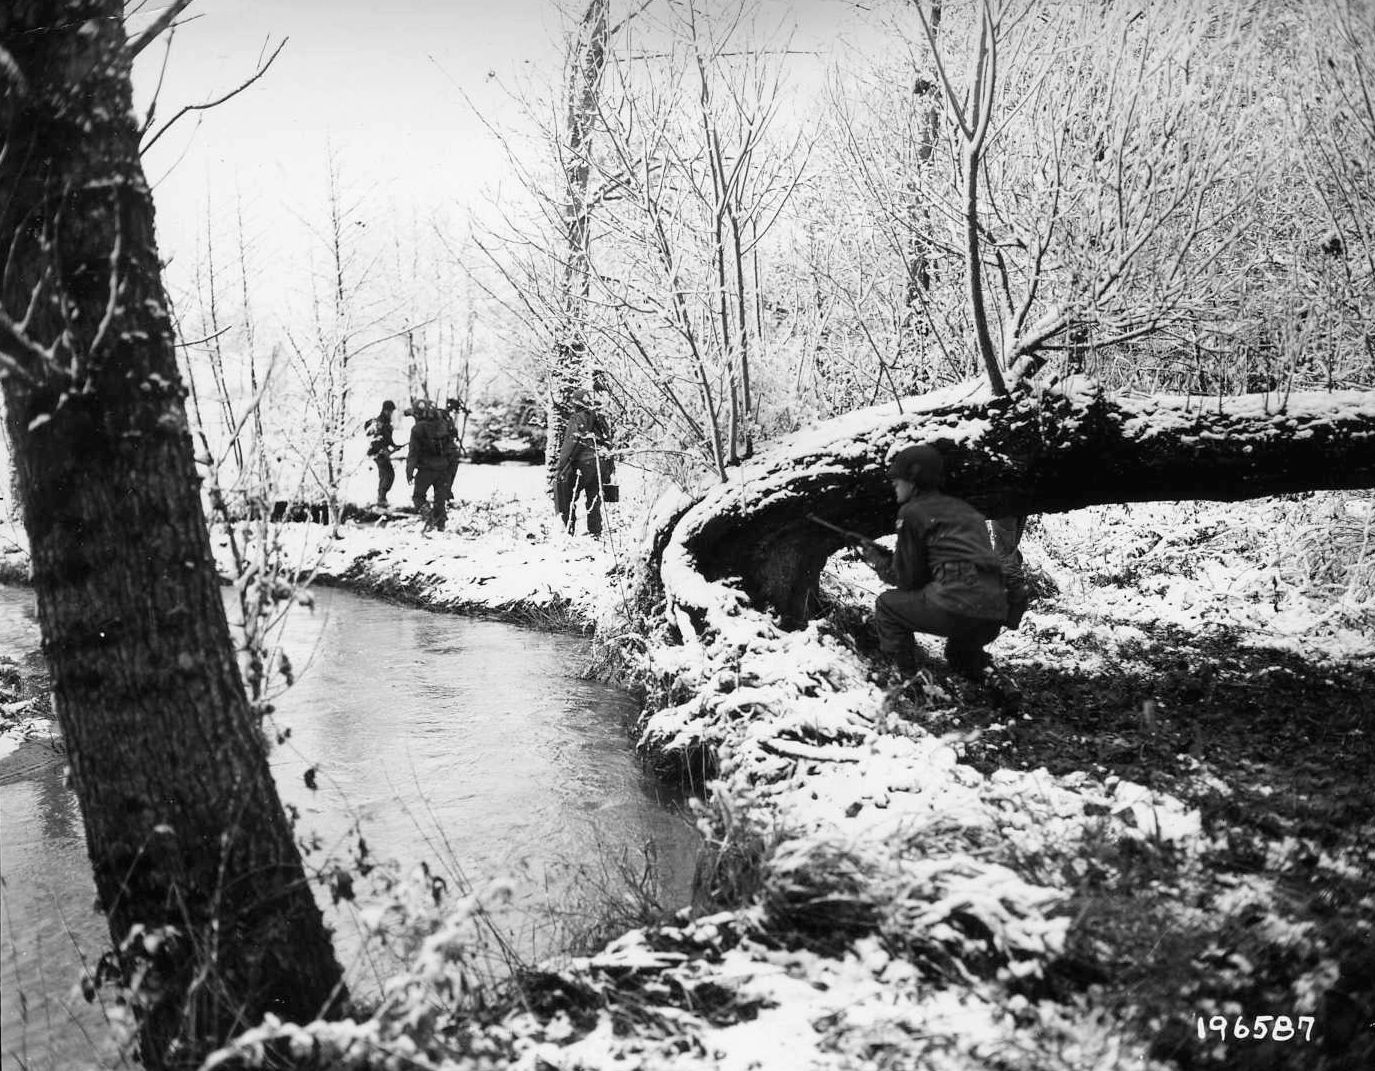 Near St. Helene, France, a heavy machine gun section of the 1st Battalion, 30th Regiment, 3rd Infantry Division moves forward along a stream under the watchful eye of a covering rifleman.